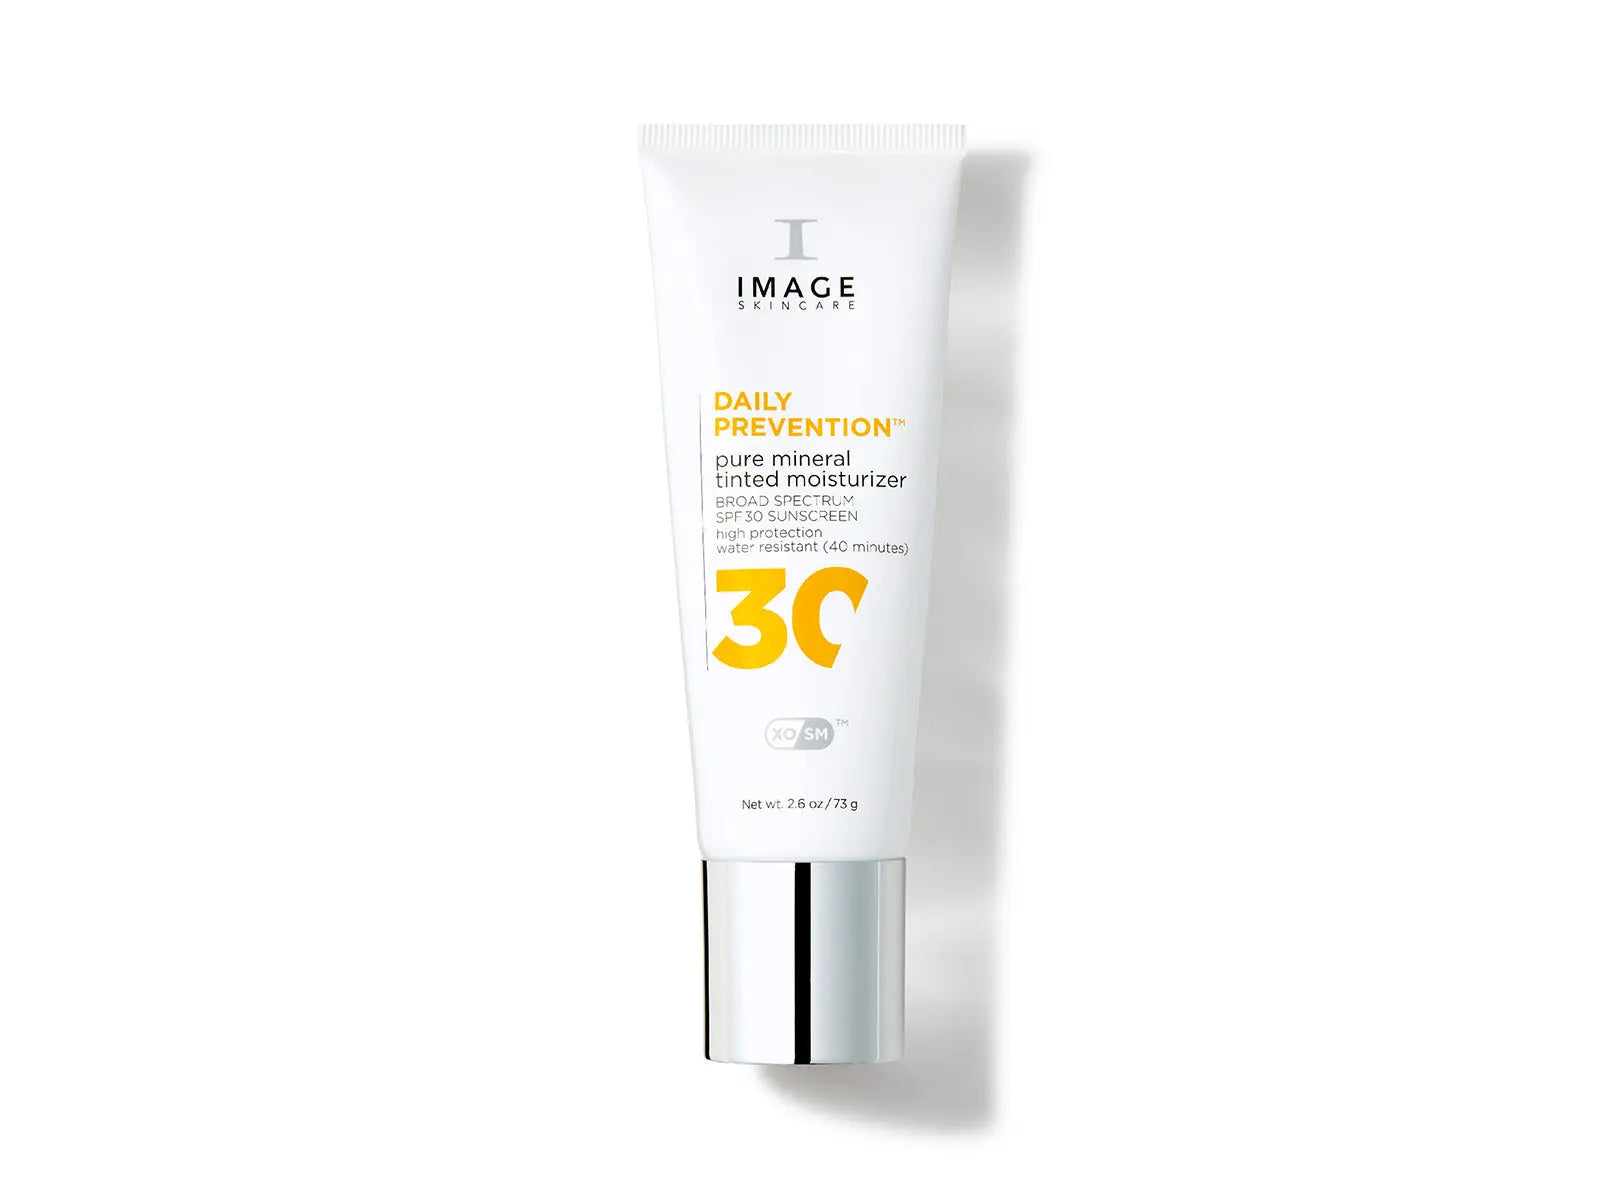 Daily Prevention - Pure Mineral Tinted Moisturizer SPF 30 IMAGE